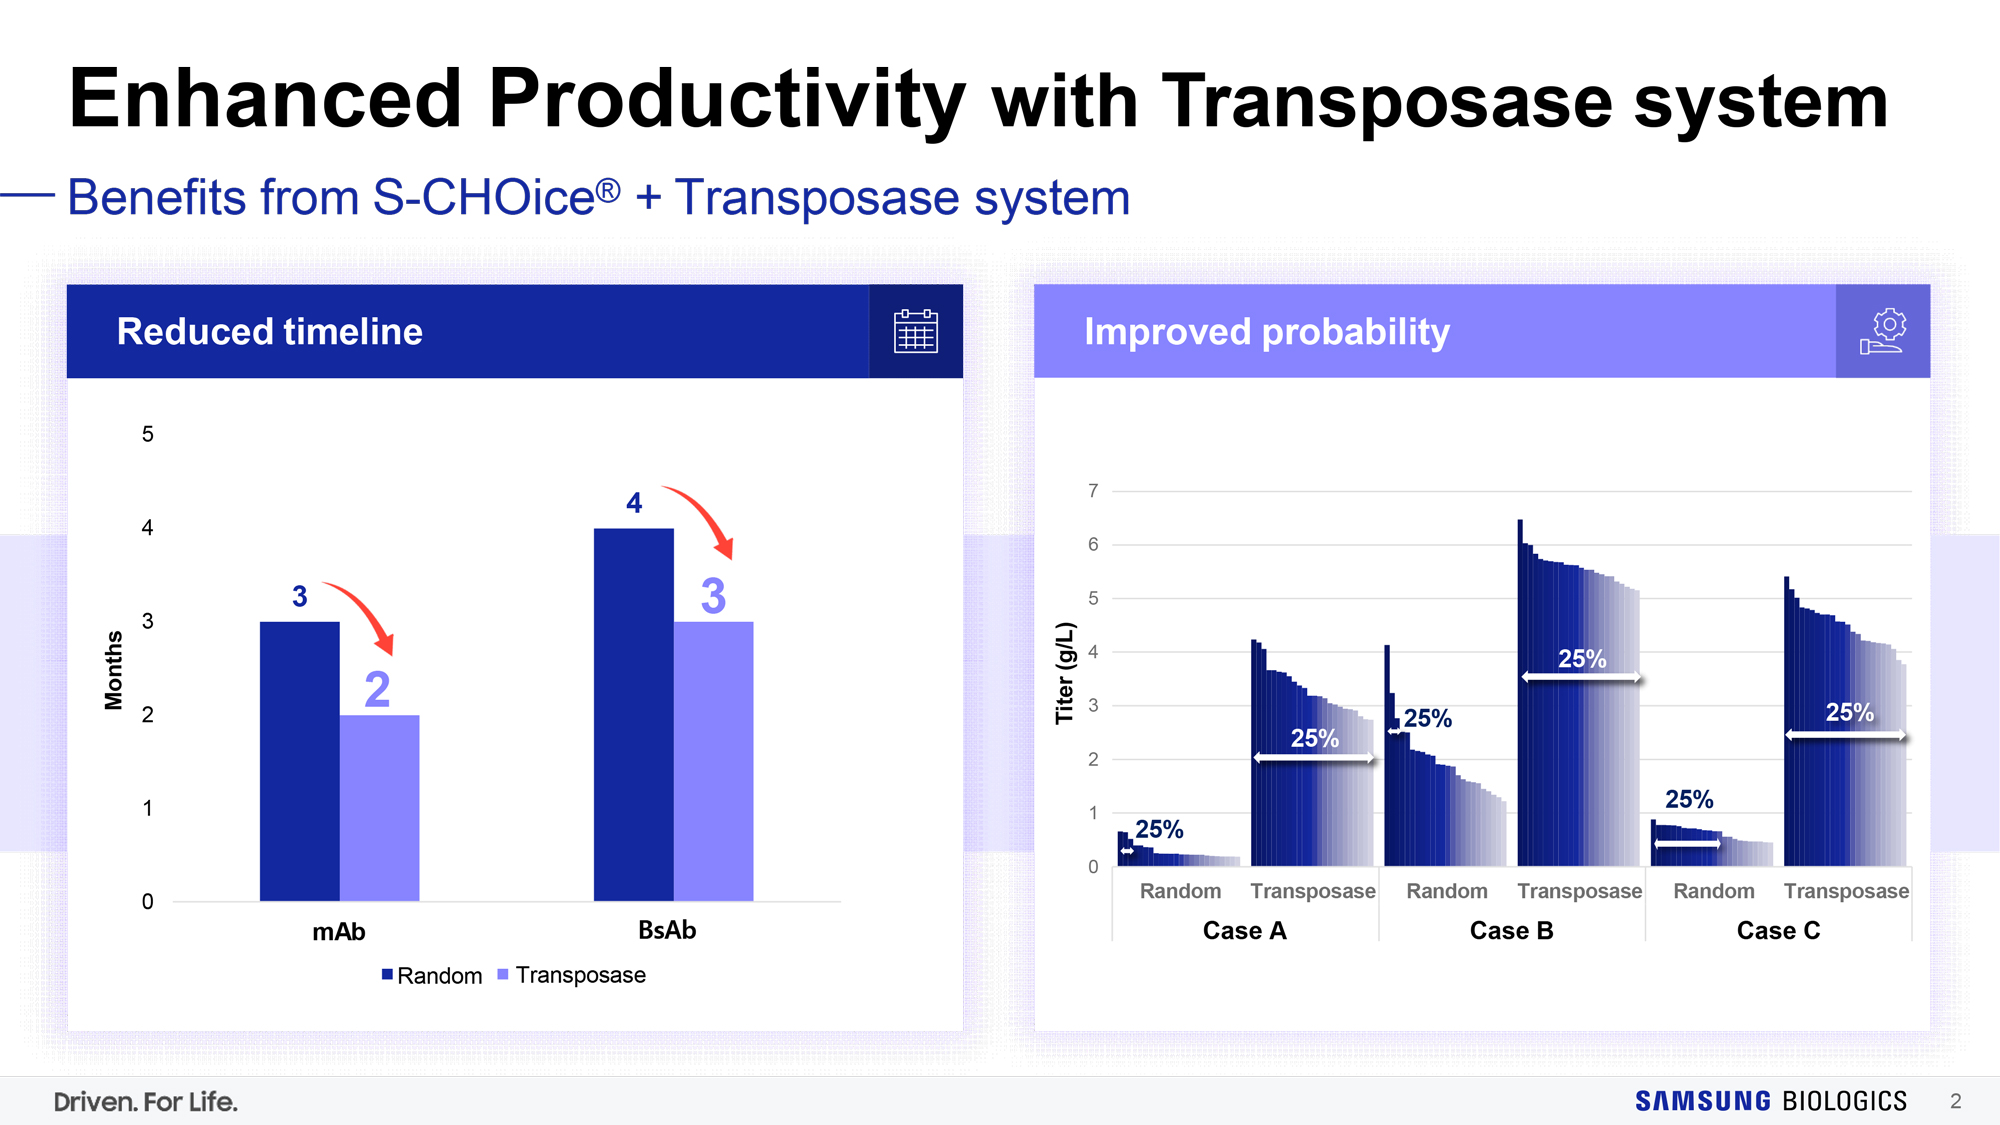 Enhanced Productivity with Transposase system